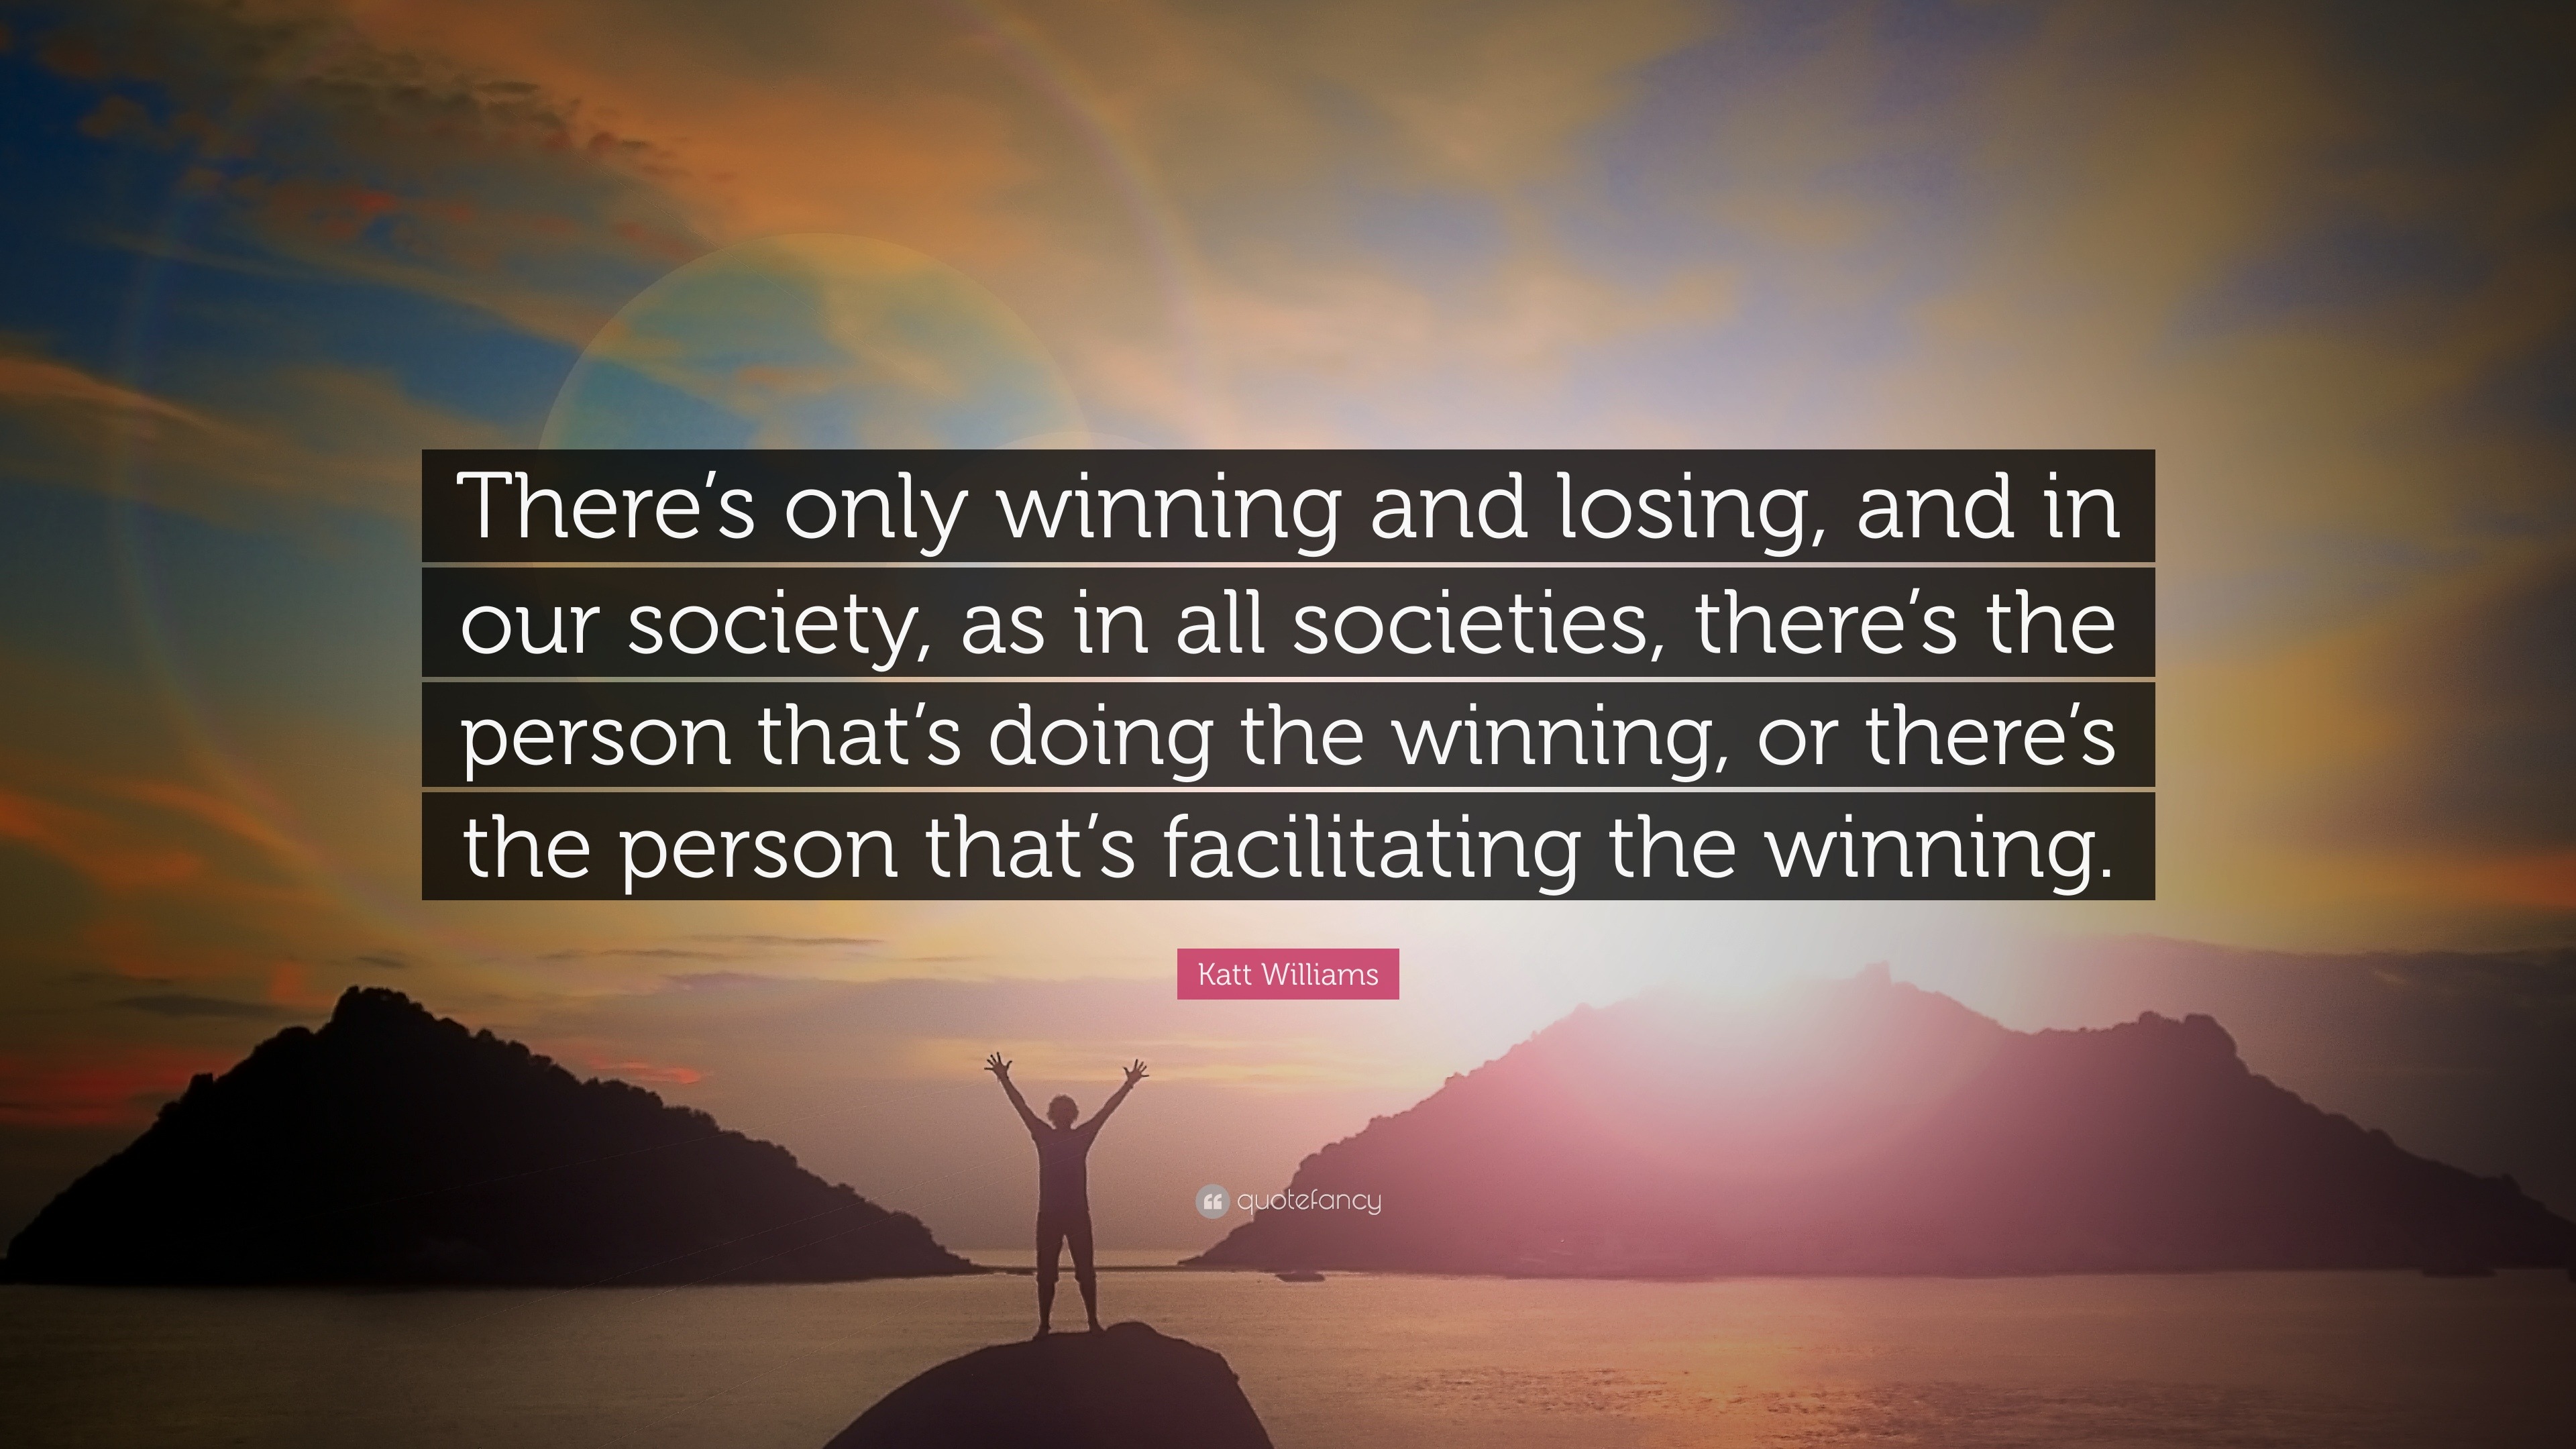 Katt Williams Quote: "There's only winning and losing, and in our society, as in all societies ...